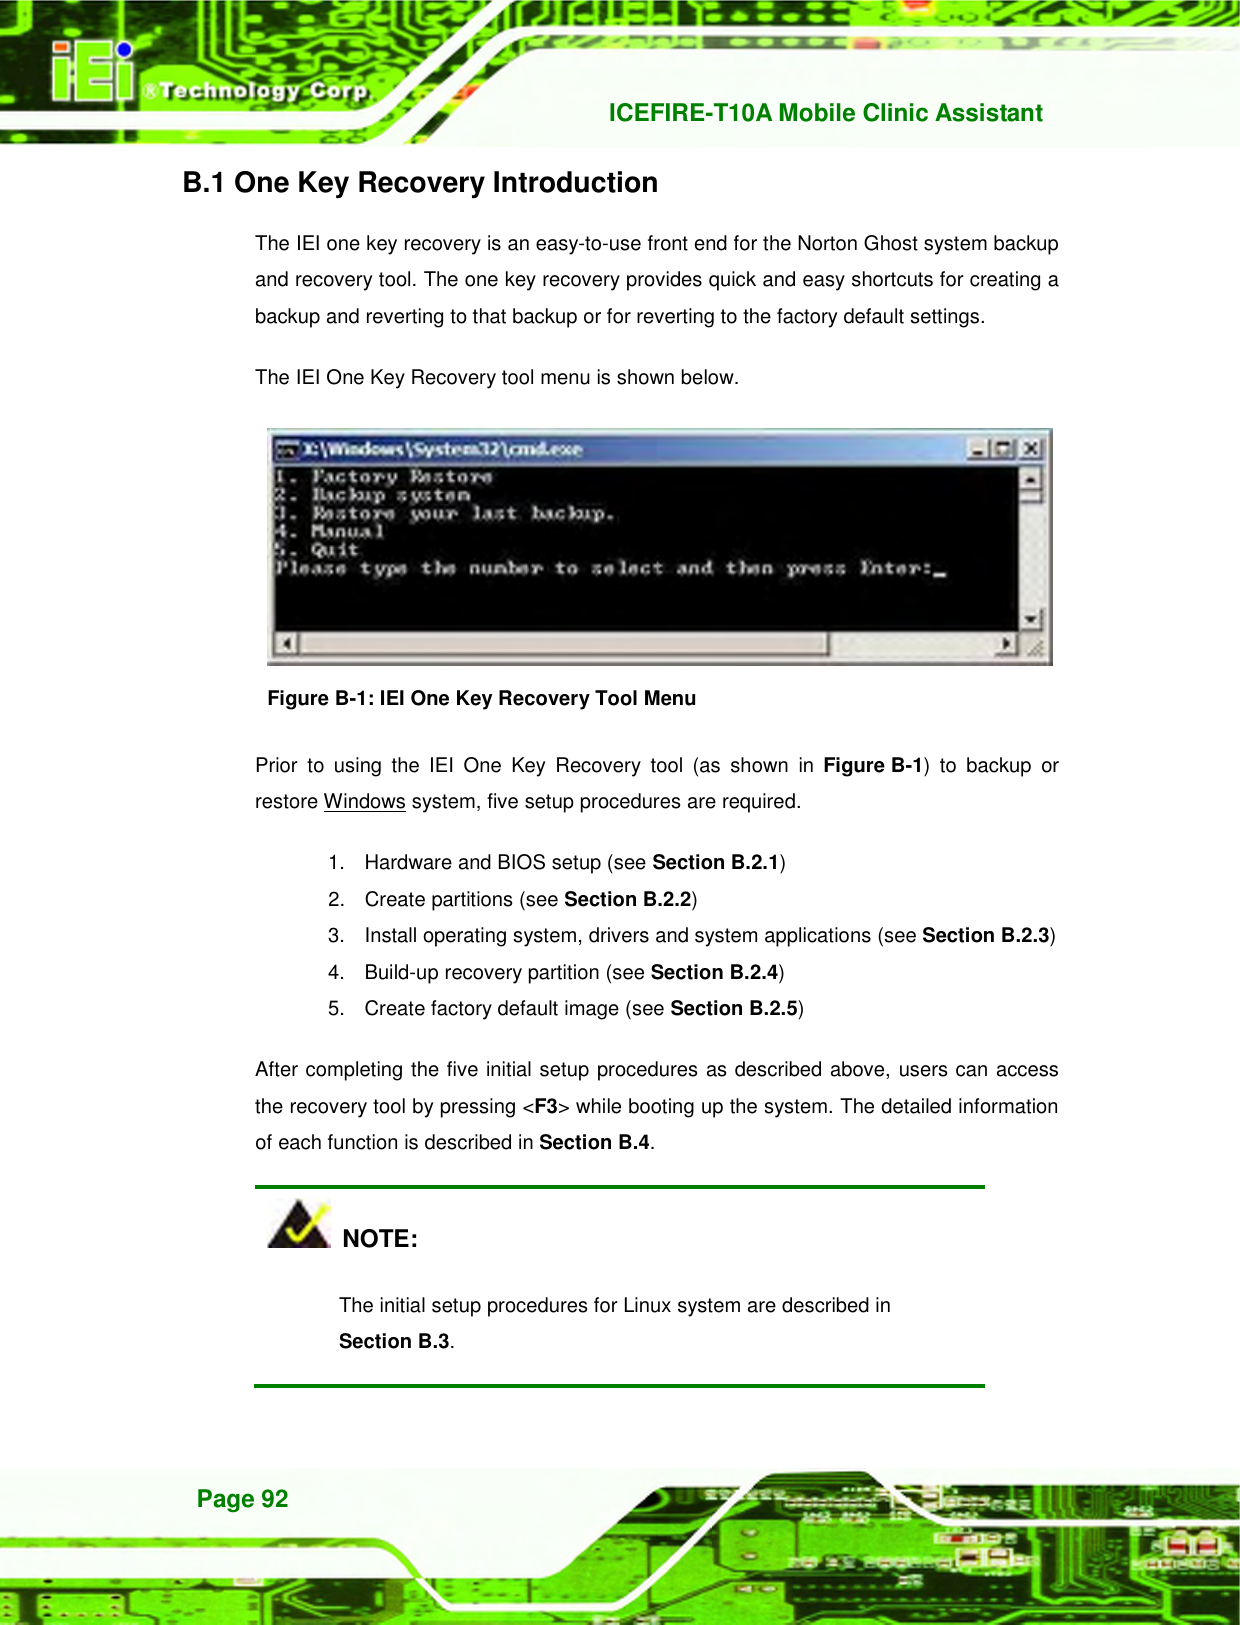   ICEFIRE-T10A Mobile Clinic Assistant Page 92 B.1 One Key Recovery Introduction The IEI one key recovery is an easy-to-use front end for the Norton Ghost system backup and recovery tool. The one key recovery provides quick and easy shortcuts for creating a backup and reverting to that backup or for reverting to the factory default settings.   The IEI One Key Recovery tool menu is shown below.    Figure B-1: IEI One Key Recovery Tool Menu Prior  to  using  the  IEI  One  Key  Recovery  tool  (as  shown  in 761H761H442H525HFigure B-1)  to  backup  or restore Windows system, five setup procedures are required.   1.  Hardware and BIOS setup (see Section 762H762H443H526HB.2.1) 2.  Create partitions (see Section 763H763H444H527HB.2.2) 3.  Install operating system, drivers and system applications (see Section 764H764H445H528HB.2.3) 4.  Build-up recovery partition (see Section 765H765H446H529HB.2.4) 5.  Create factory default image (see Section 766H766H447H530HB.2.5)   After completing the five initial setup procedures as described above, users can access the recovery tool by pressing &lt;F3&gt; while booting up the system. The detailed information of each function is described in Section 767H767H448H531HB.4.   NOTE: The initial setup procedures for Linux system are described in   Section 768H768H449H532HB.3. 